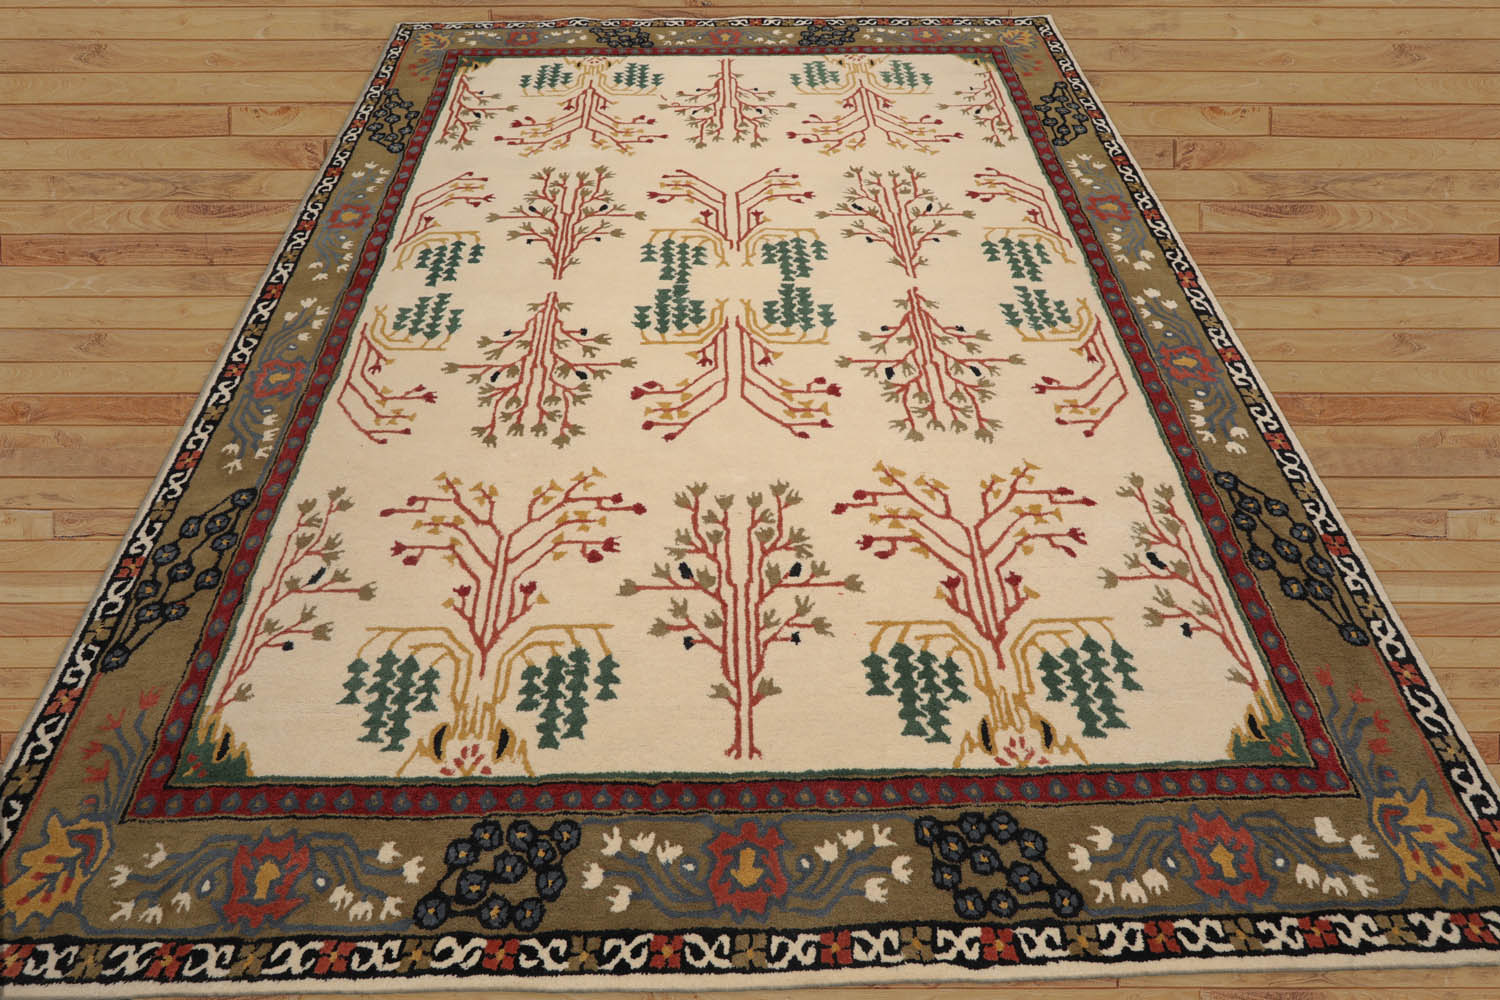 Sutcliffe 8x10 Hand Tufted Hand Made 100% Wool Transitional Oriental Area Rug Olive Green, Wine Color